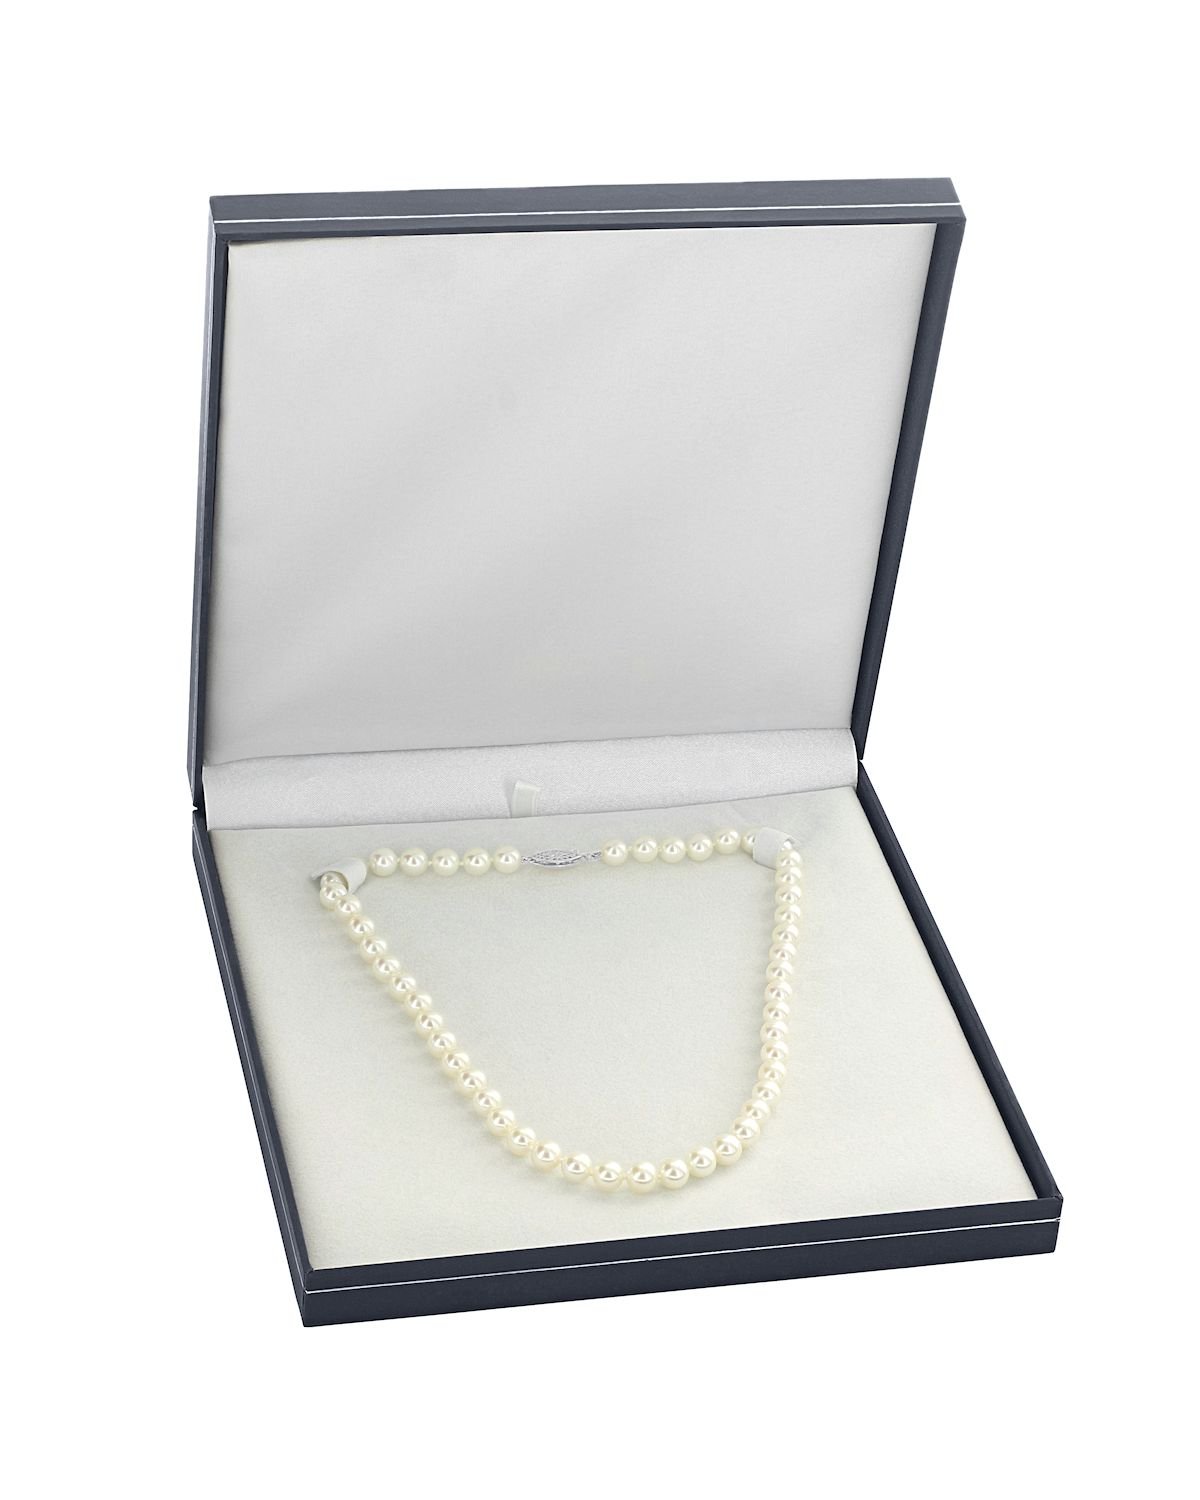 6.0- 6.5mm Japanese Akoya White Pearl Necklace- AAA Quality - Third Image